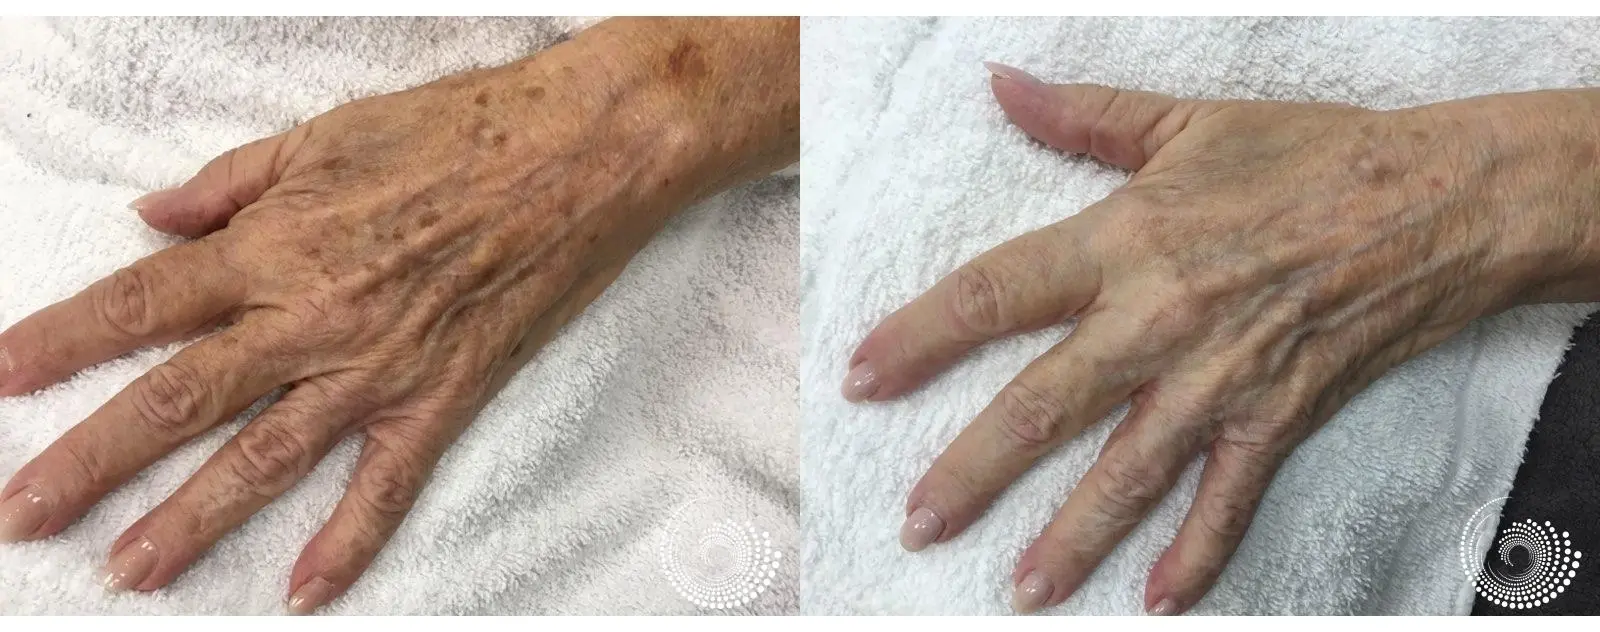 Limelight treats noticeable signs of sun damage on the hands - Before and After 1